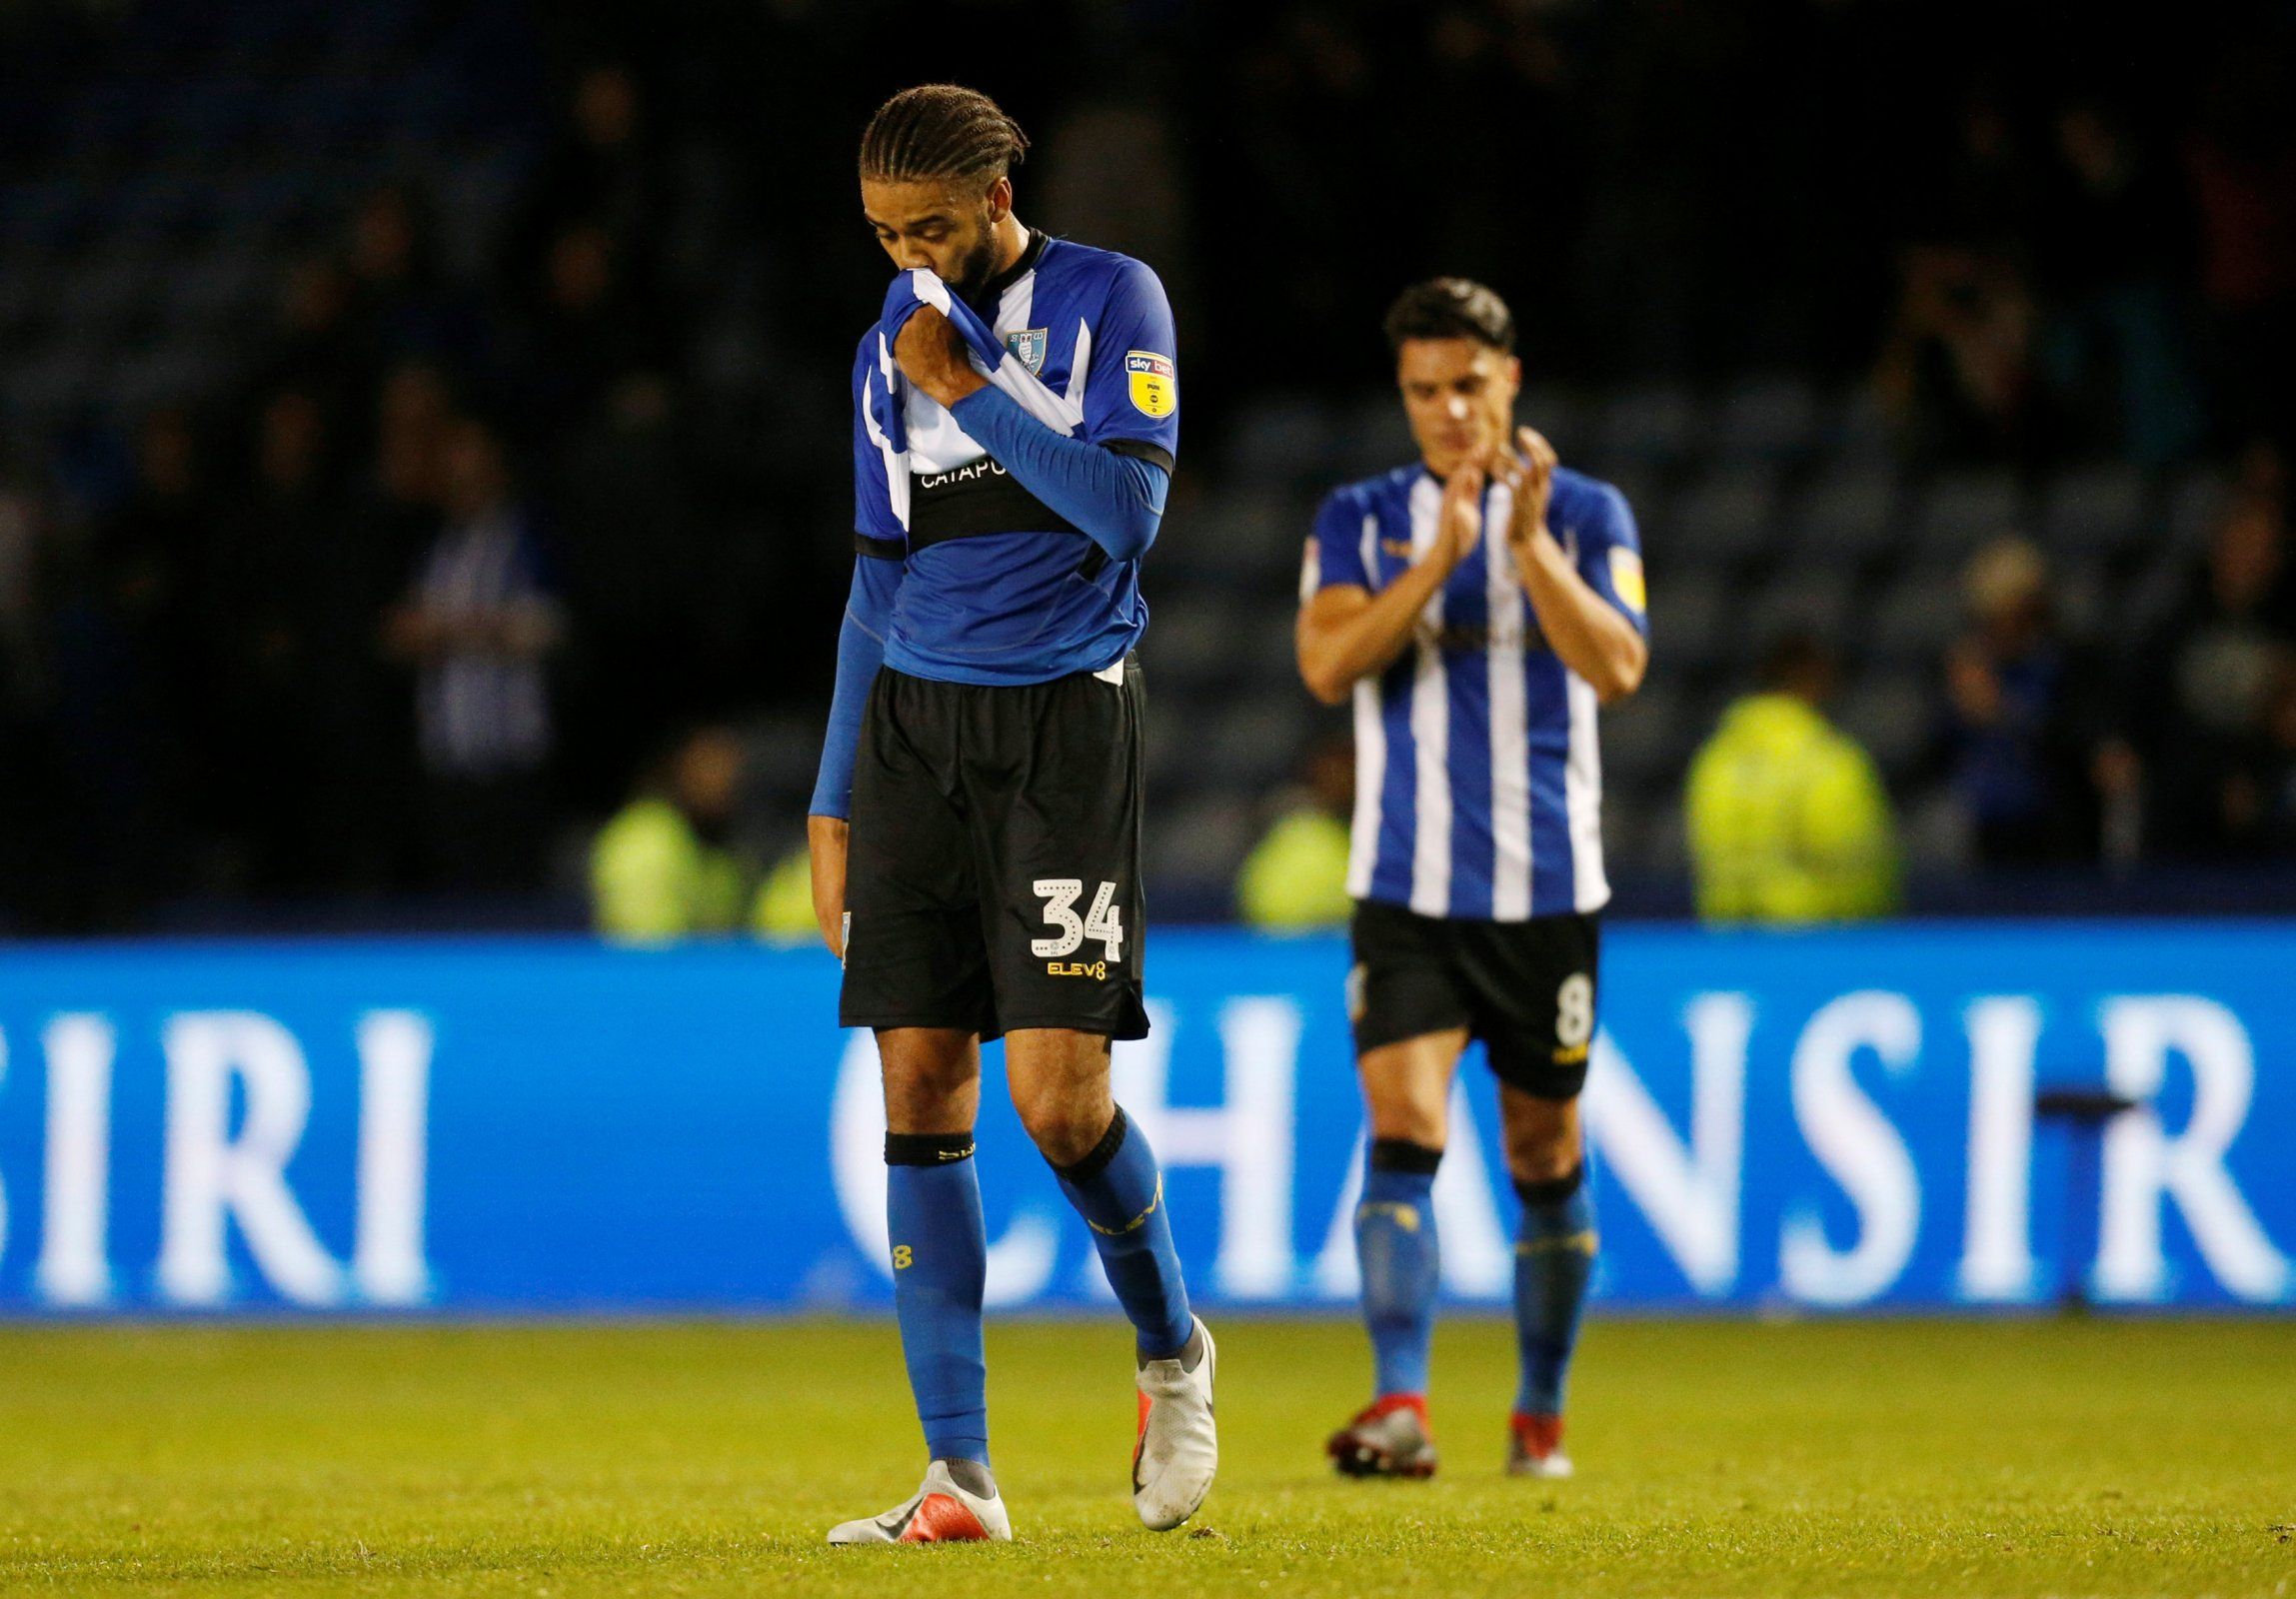 Michael Hector in action for Sheffield Wednesday.